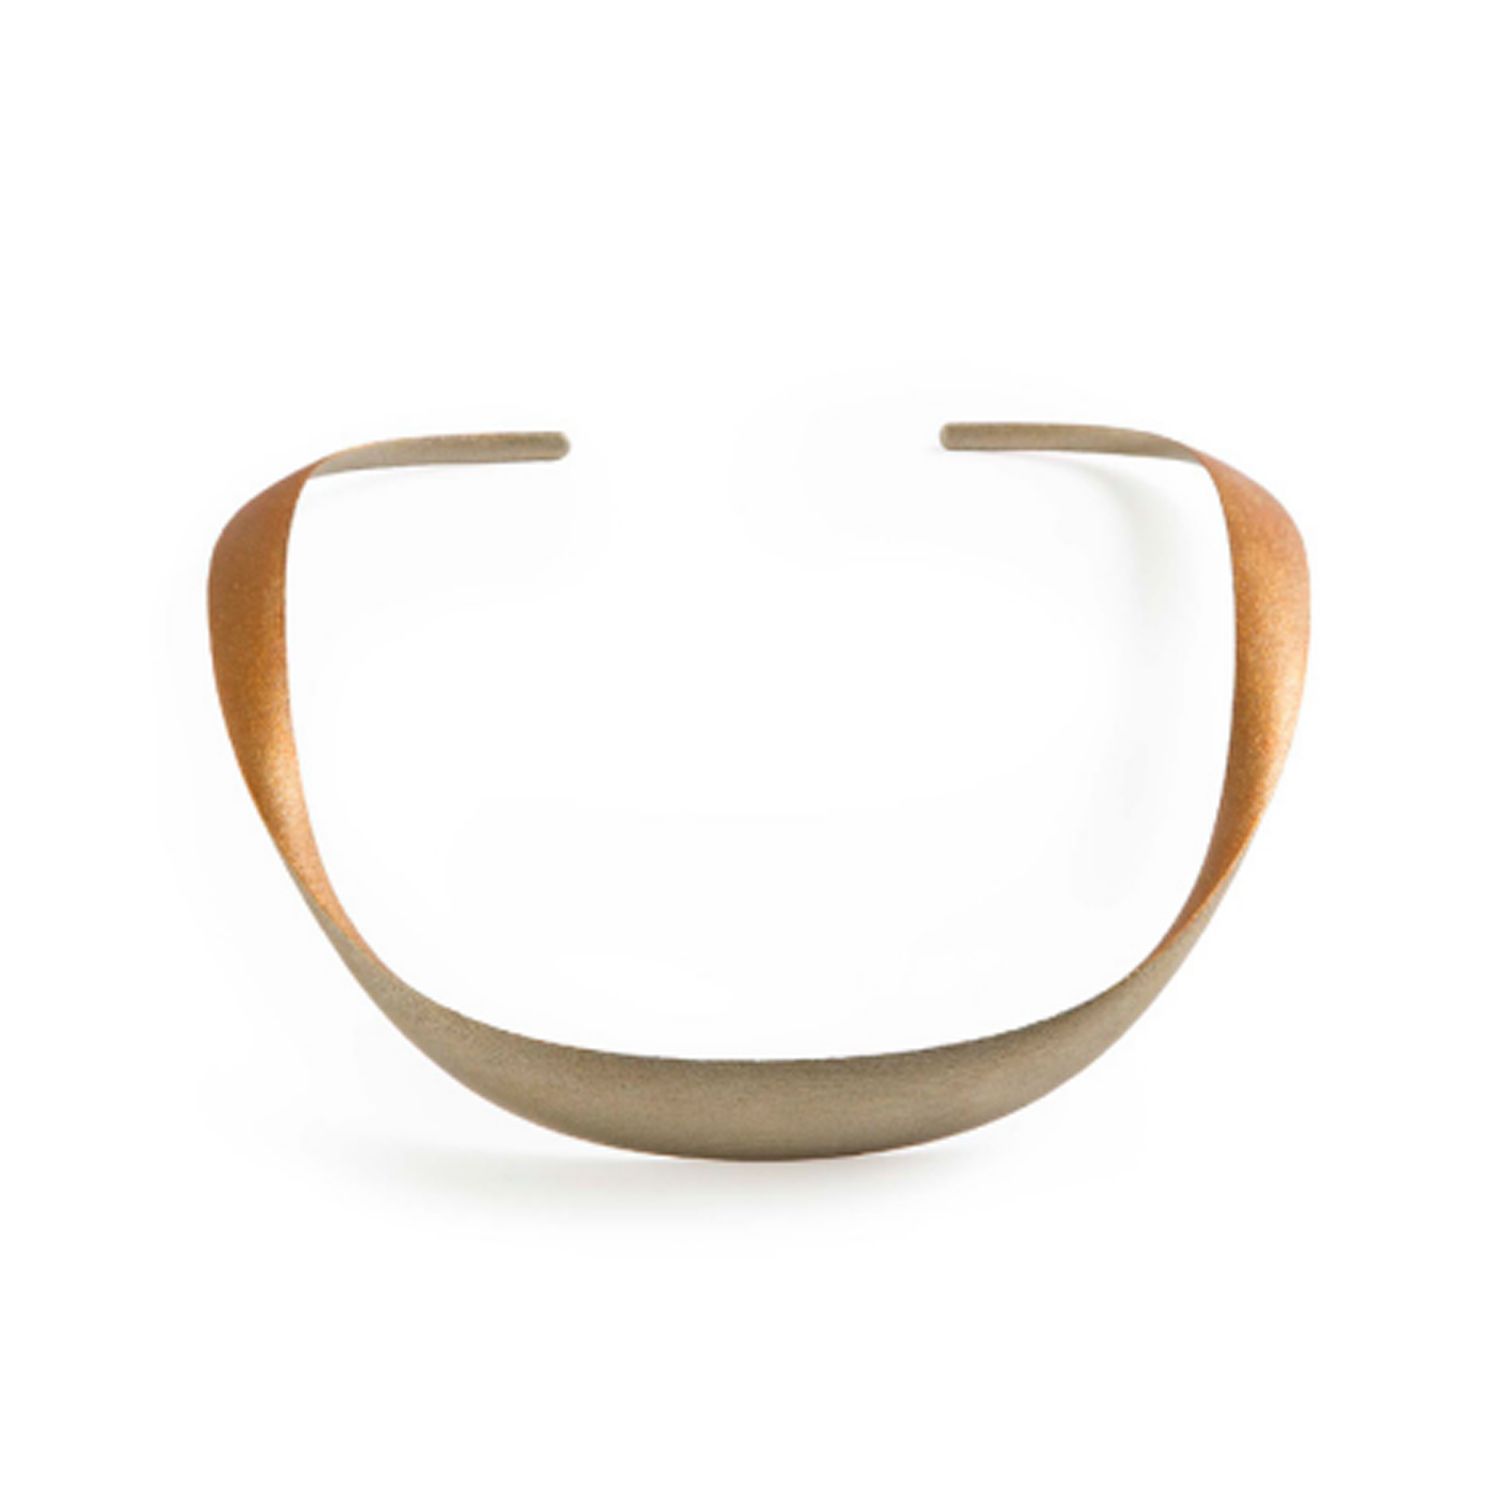 Maison 203: Flow Necklace Rose Gold Silver Product Image 1 of 1